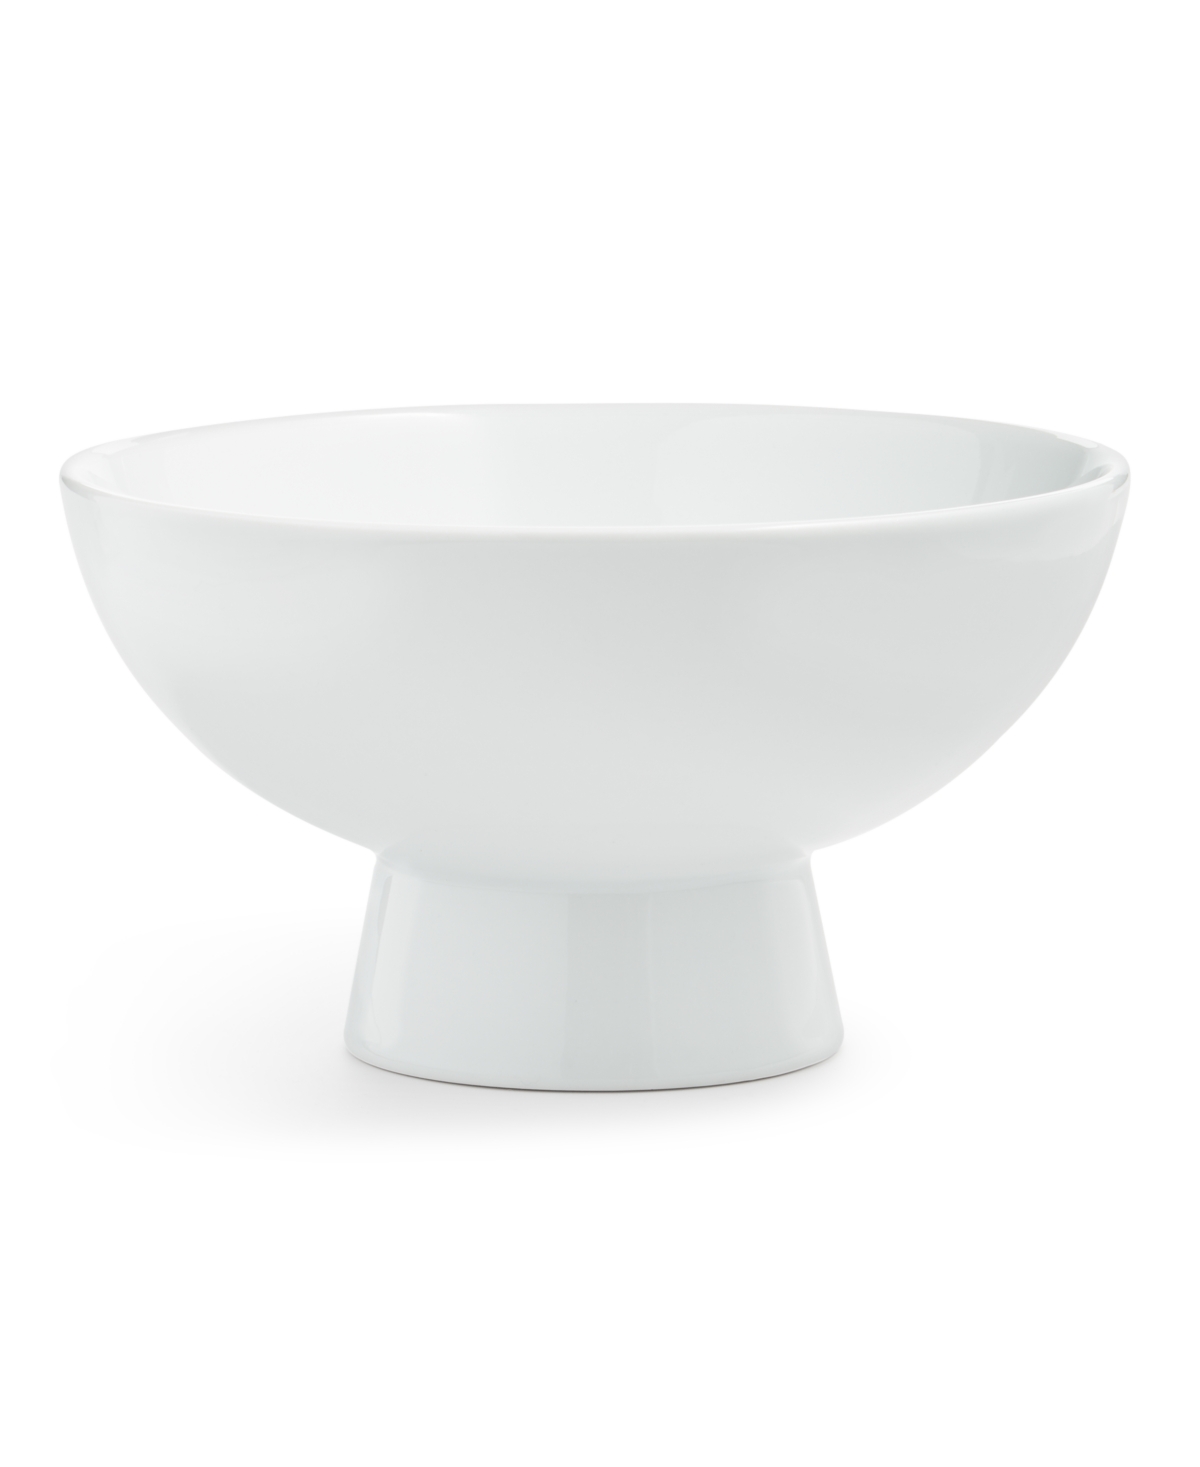 Footed Bowl, Created for Macy's - White